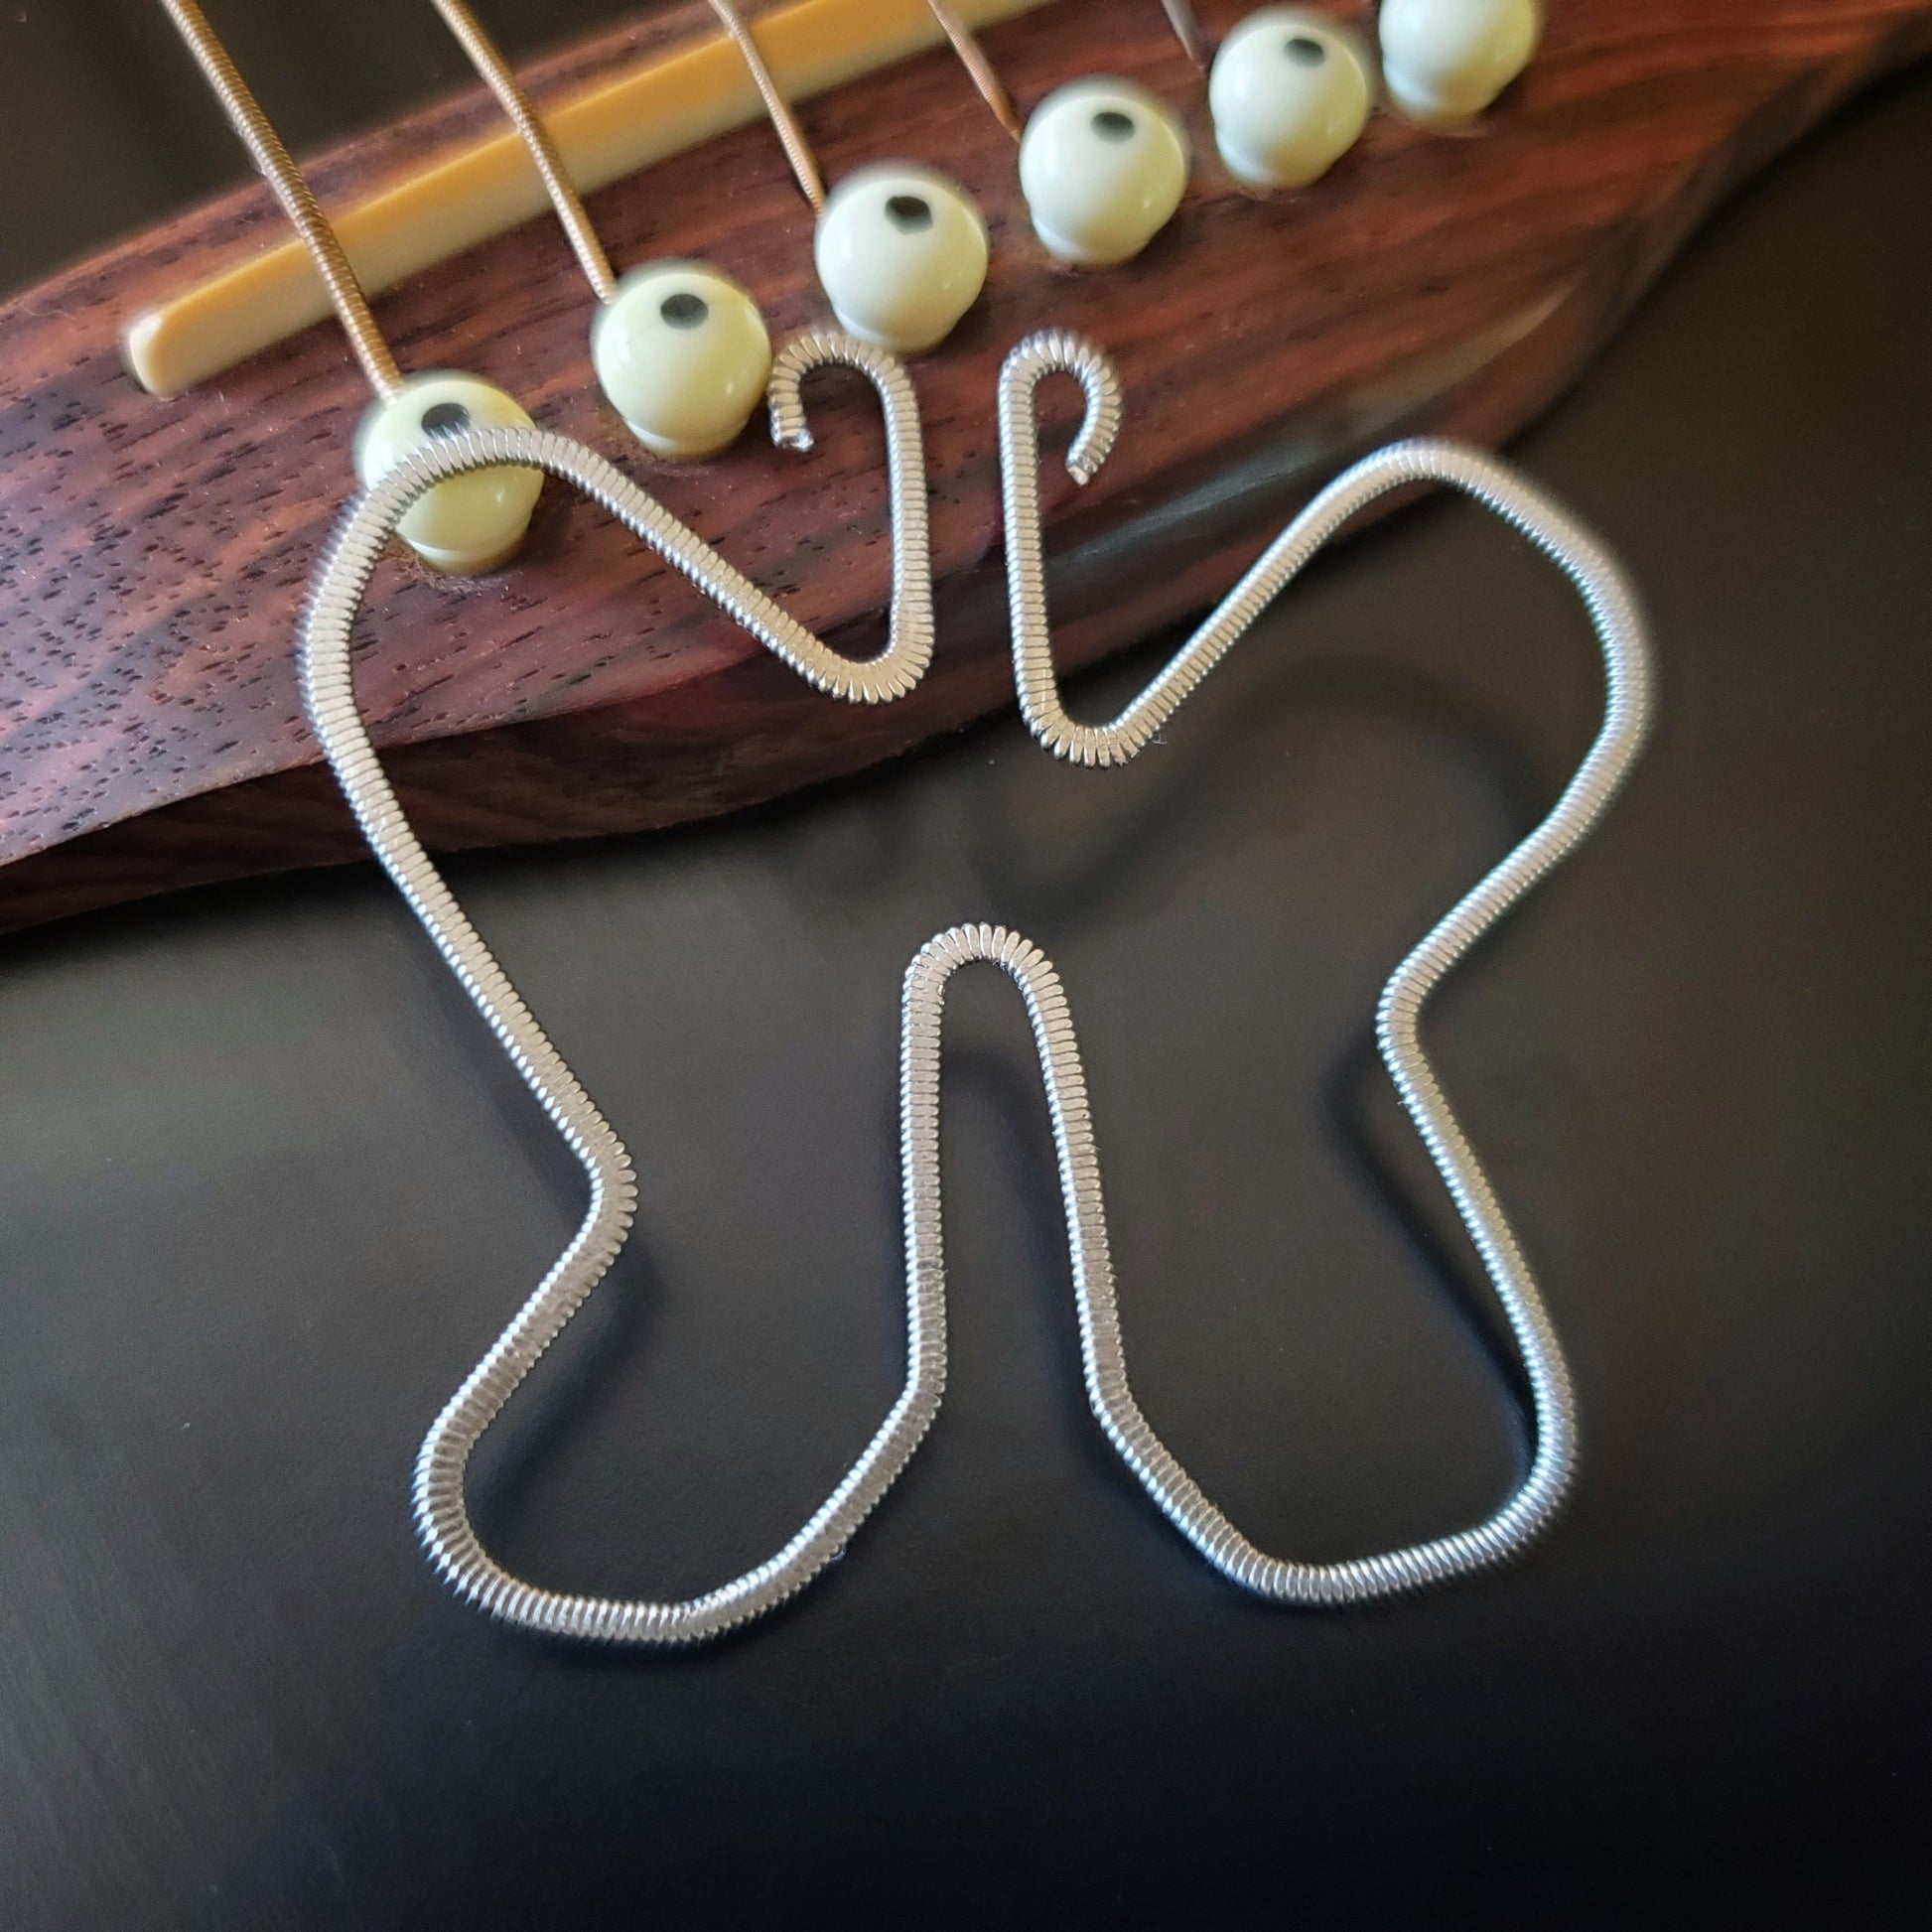 a bookmark made from an upcycled guitar string which was hammered flat and shaped into a butterfly - bookmark sits on the bridge of a black guitar